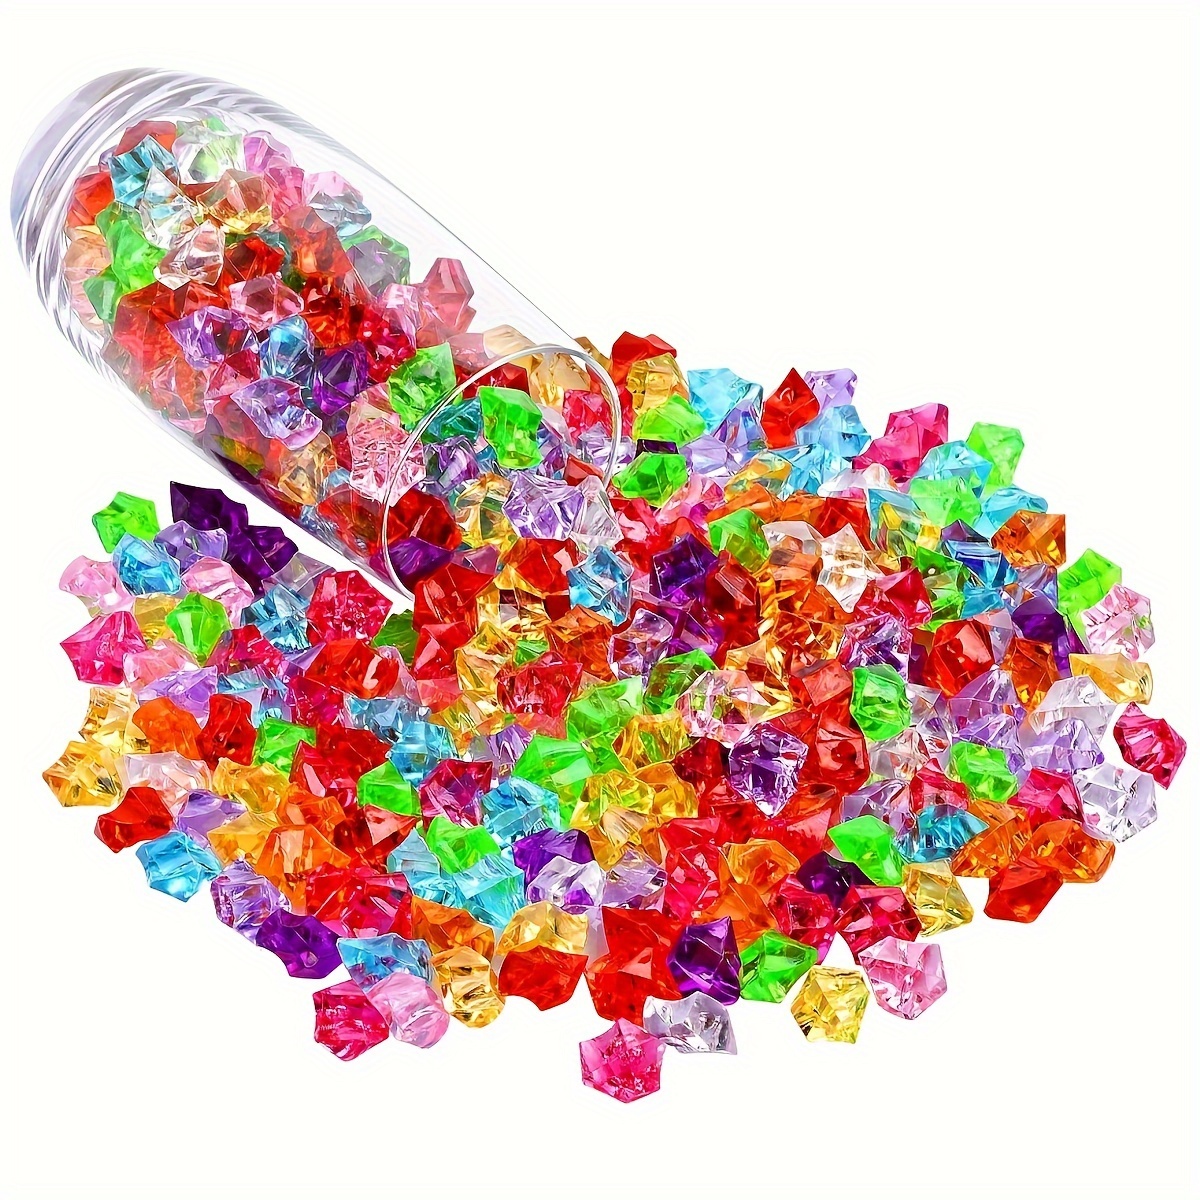 131 Pieces Gemstones for Kids Pirate Toy Gems Fake Treasure Jewels Multi  Color Acrylic Bling Faux Diamond Pearls with Drawstring Bag DIY Crafts  Pirate